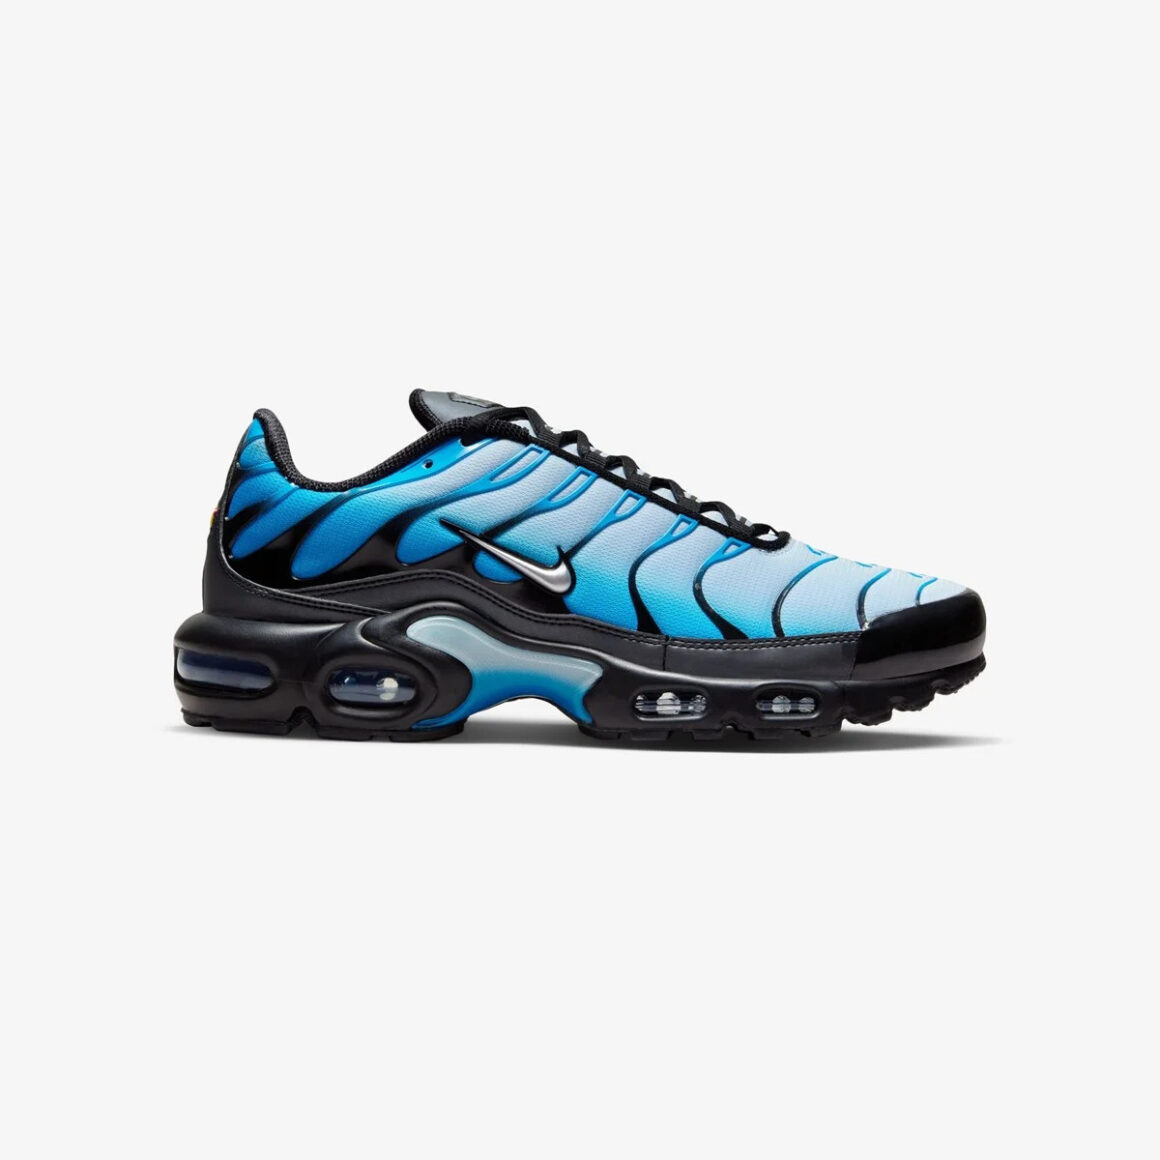 nike air max 98 tour yellow ebay shoes sale india Black Neptune Blue FQ0204-010 Lateral